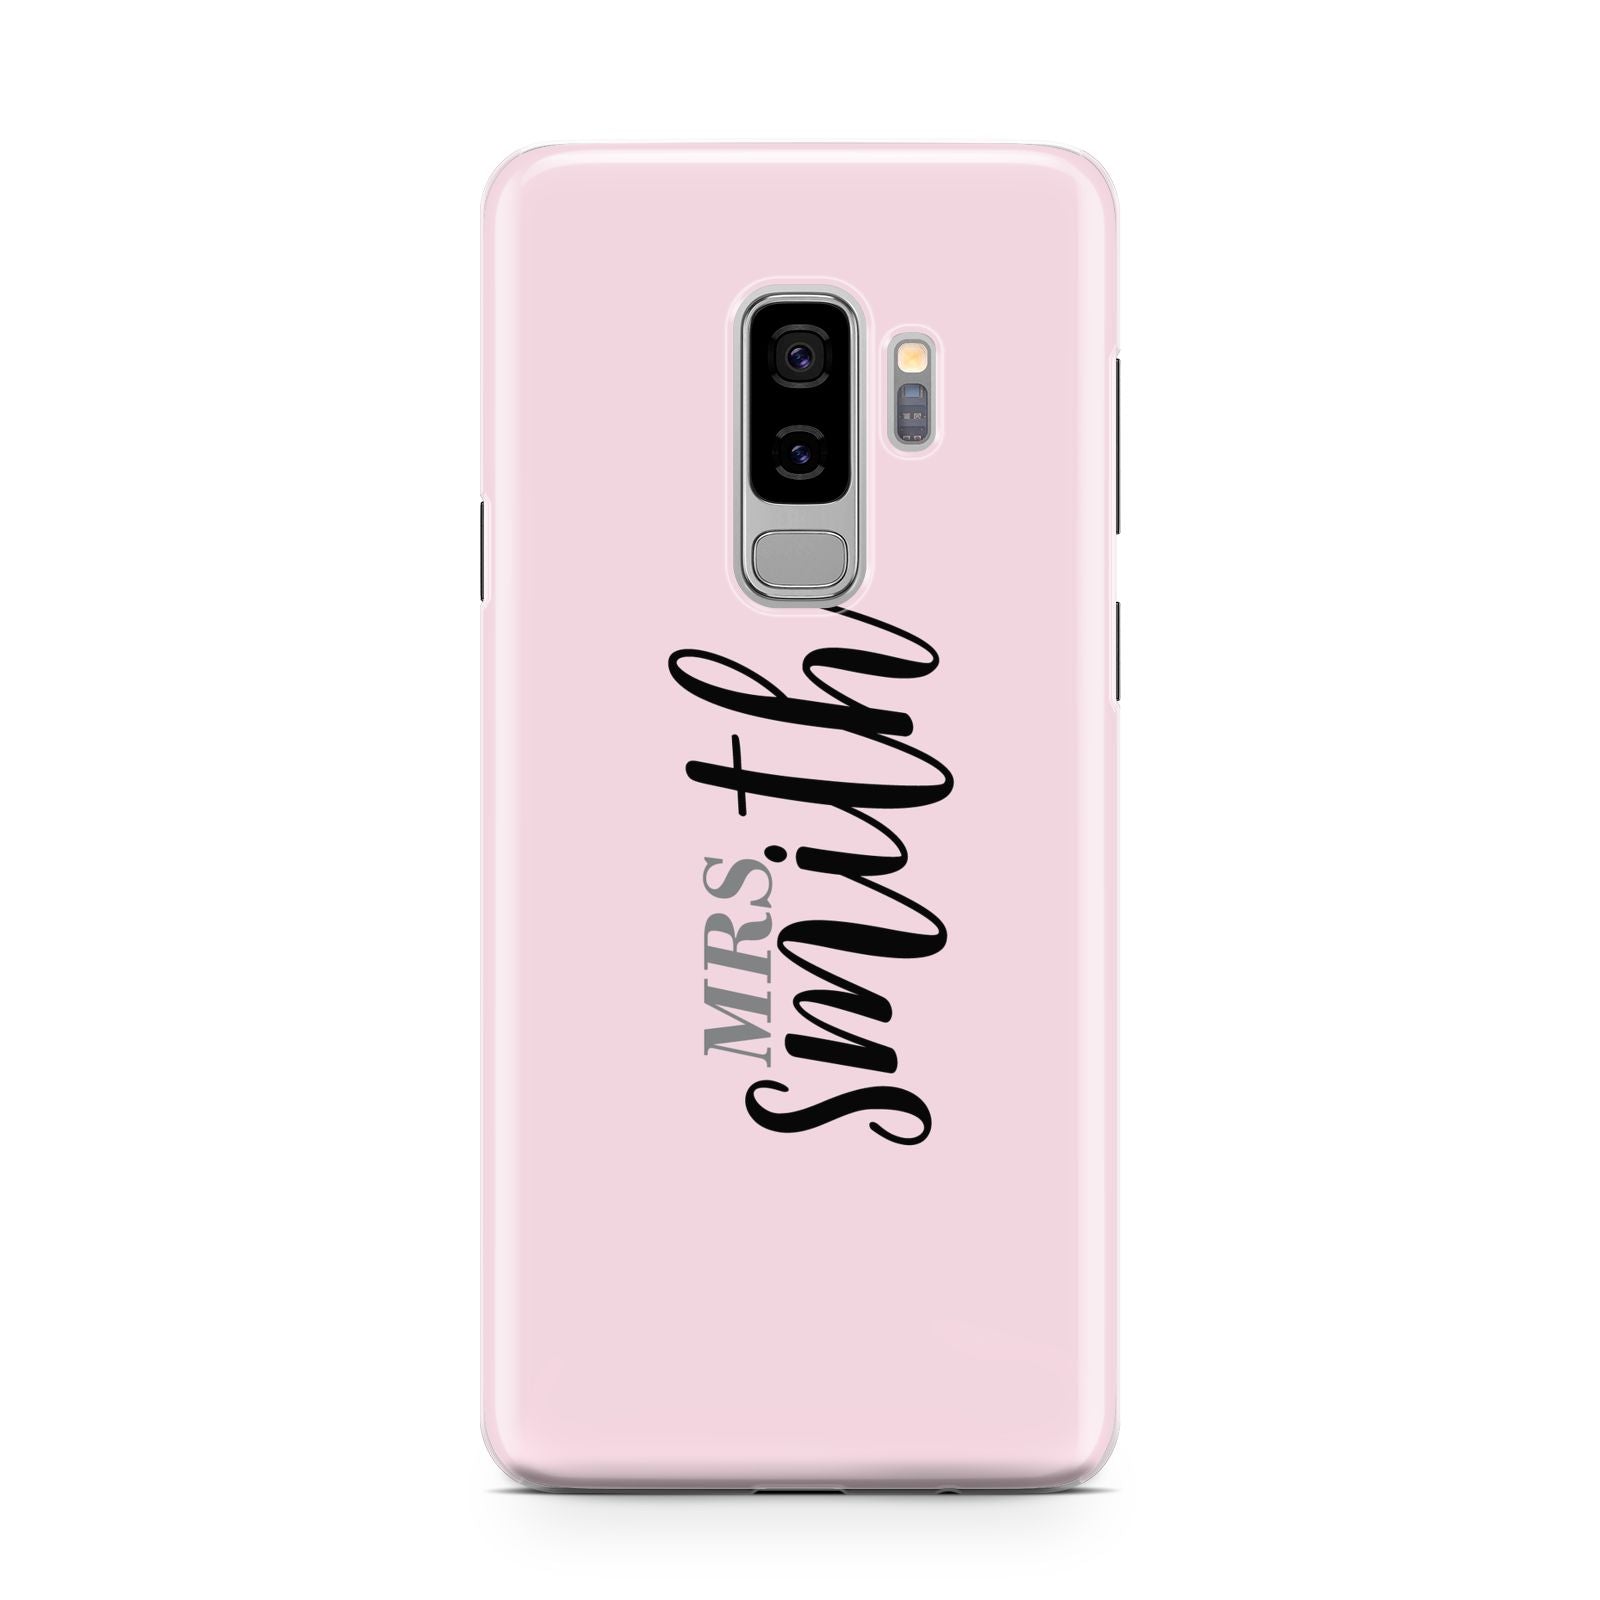 Personalised Bridal Samsung Galaxy S9 Plus Case on Silver phone